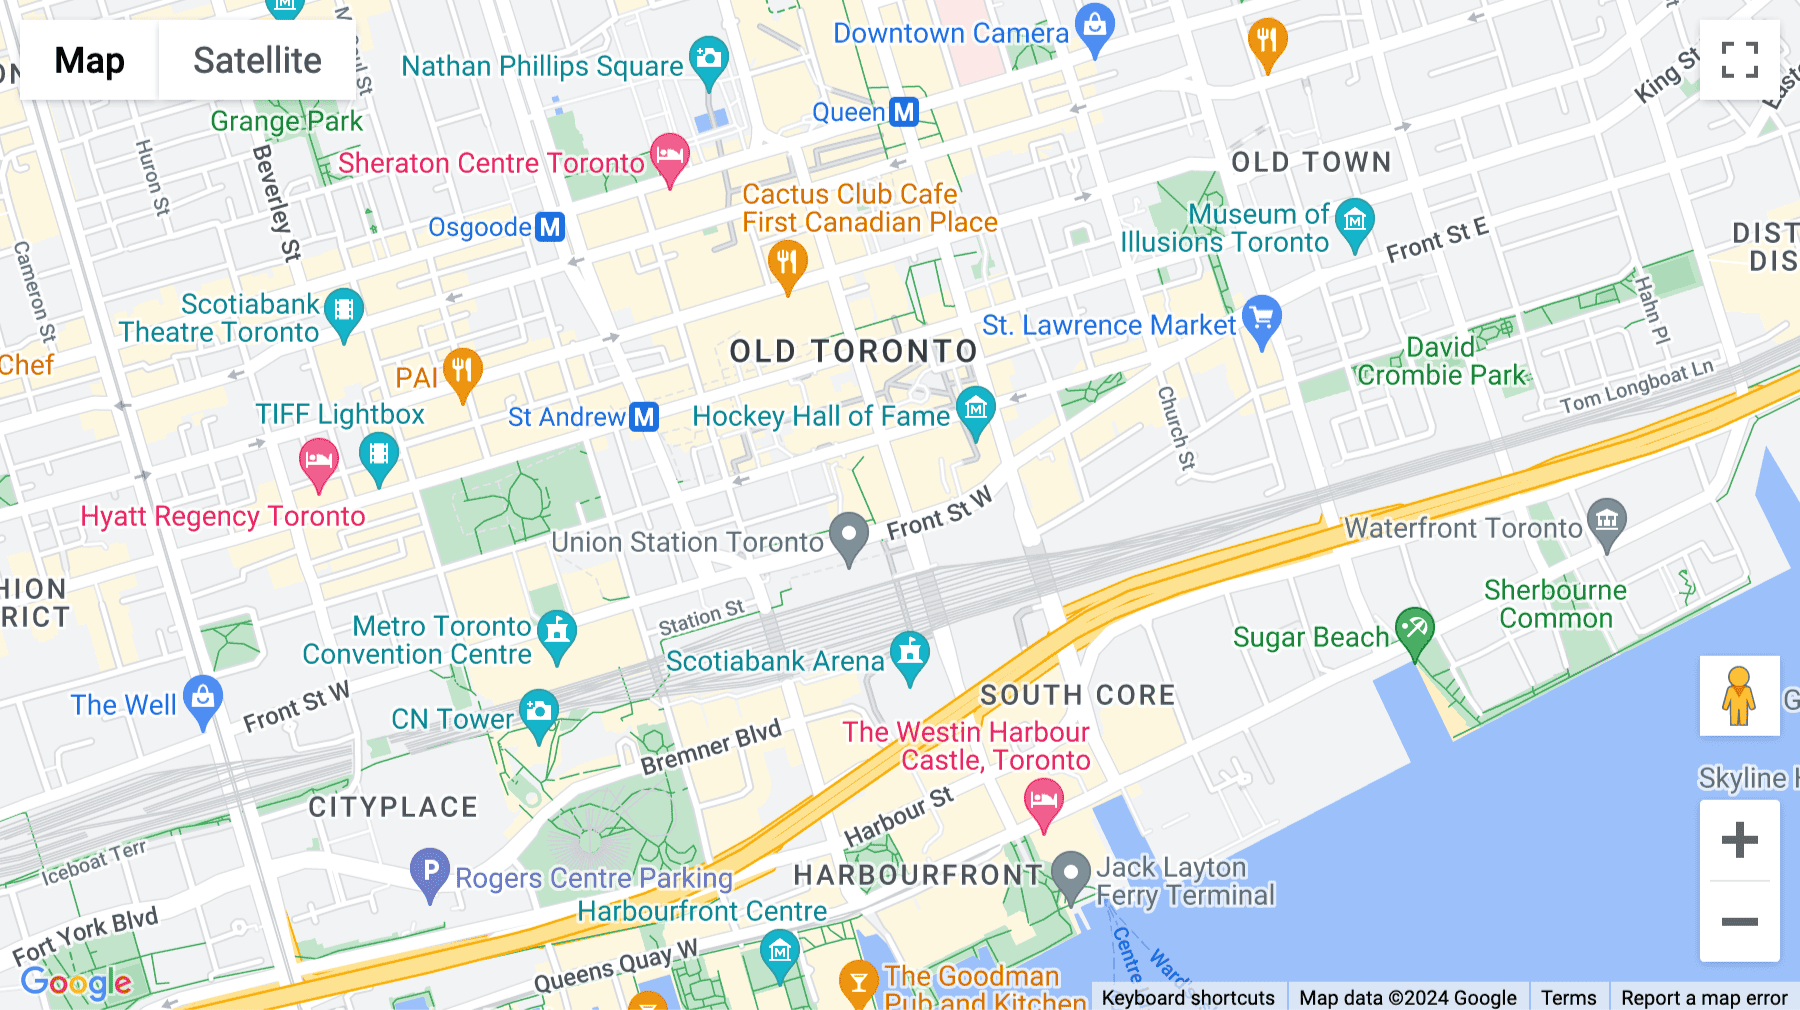 Click for interative map of 161 Bay Street,   BCE Place, Canada Trust Tower (27th Floor), Toronto